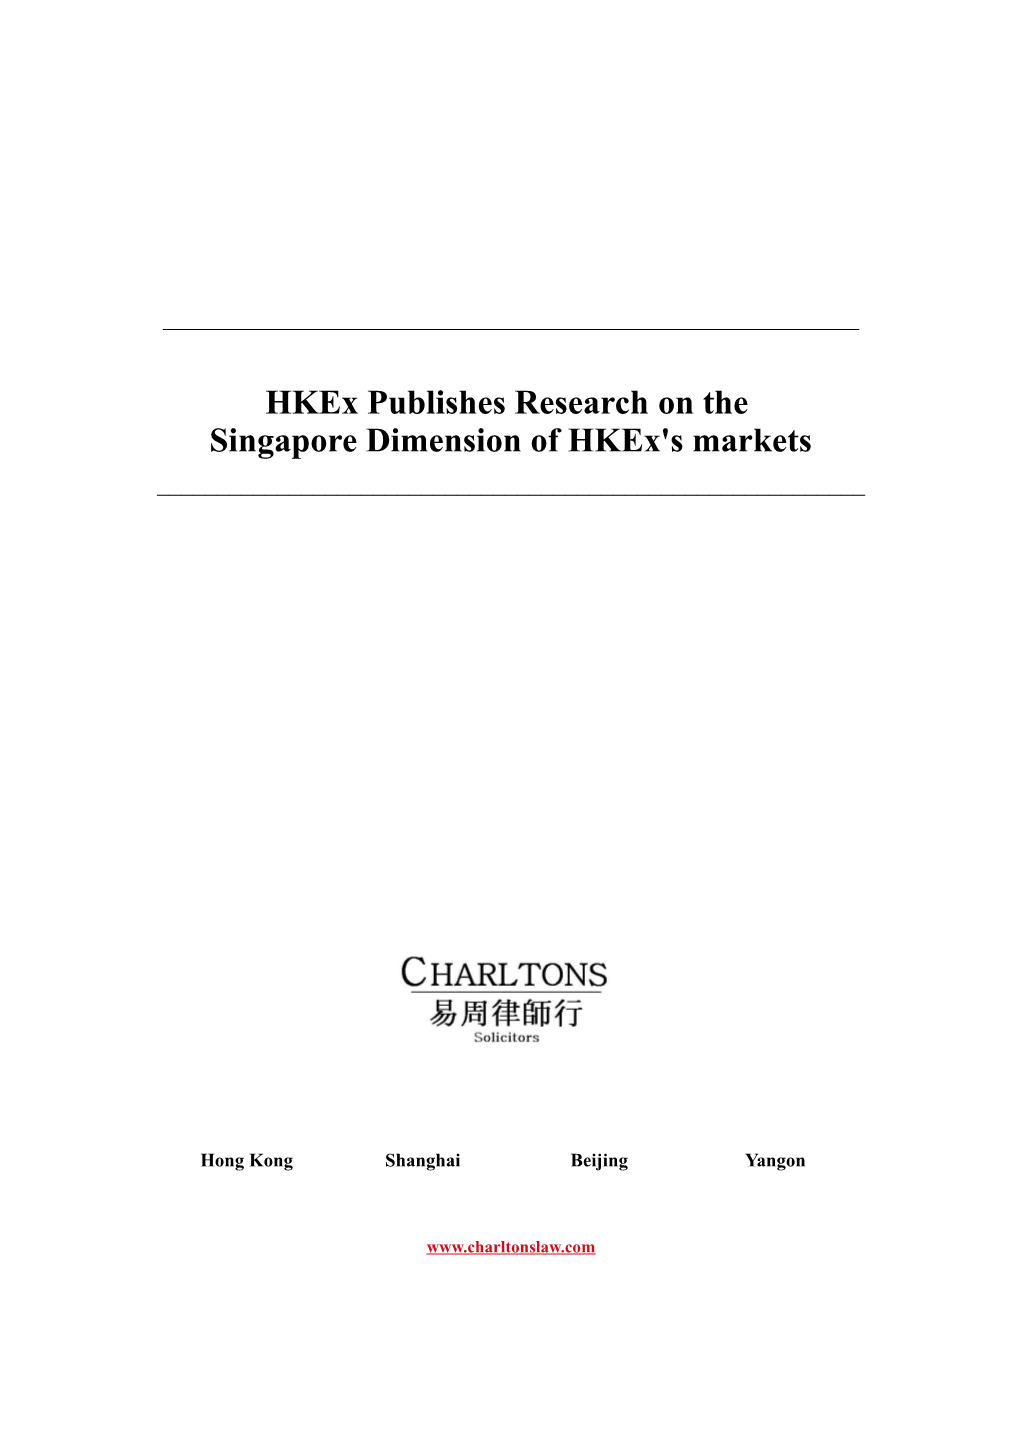 Hkex PUBLISHES RESEARCH on the SINGAPORE DIMENSION of Hkex S MARKETS